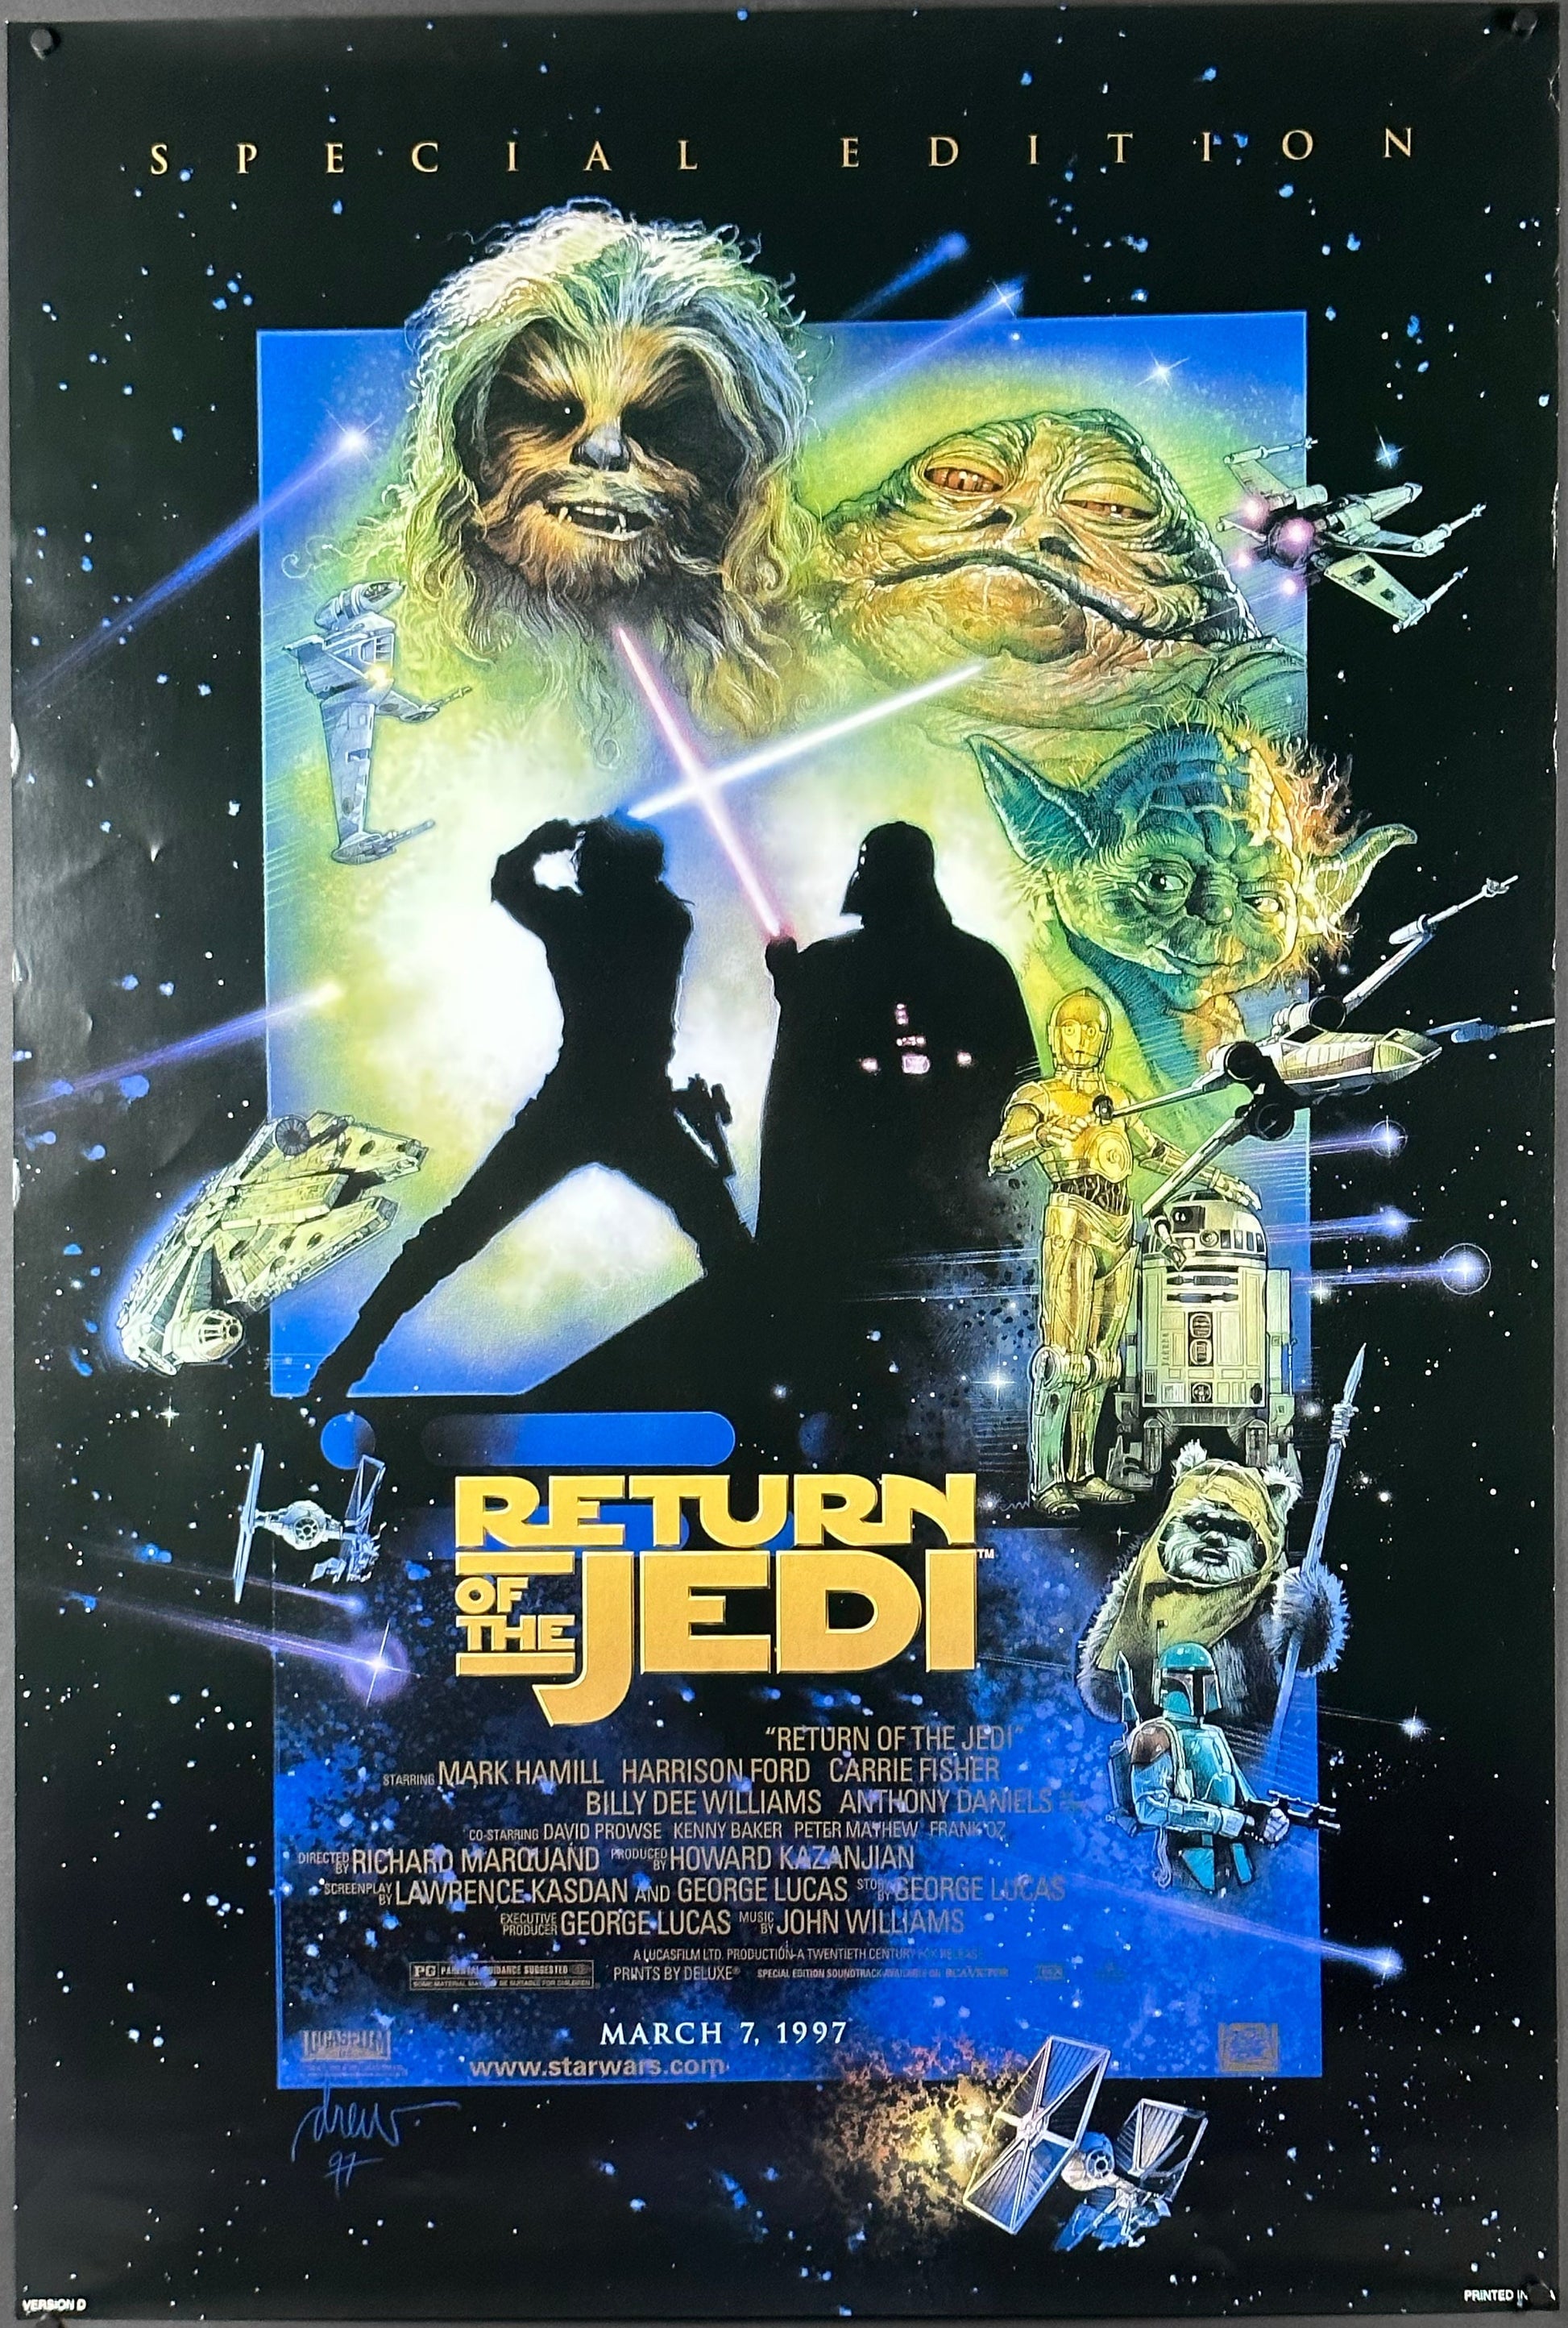 Star Wars: Episode VI - Return of the Jedi Special Edition US One Sheet (R 1997) - posterpalace.com